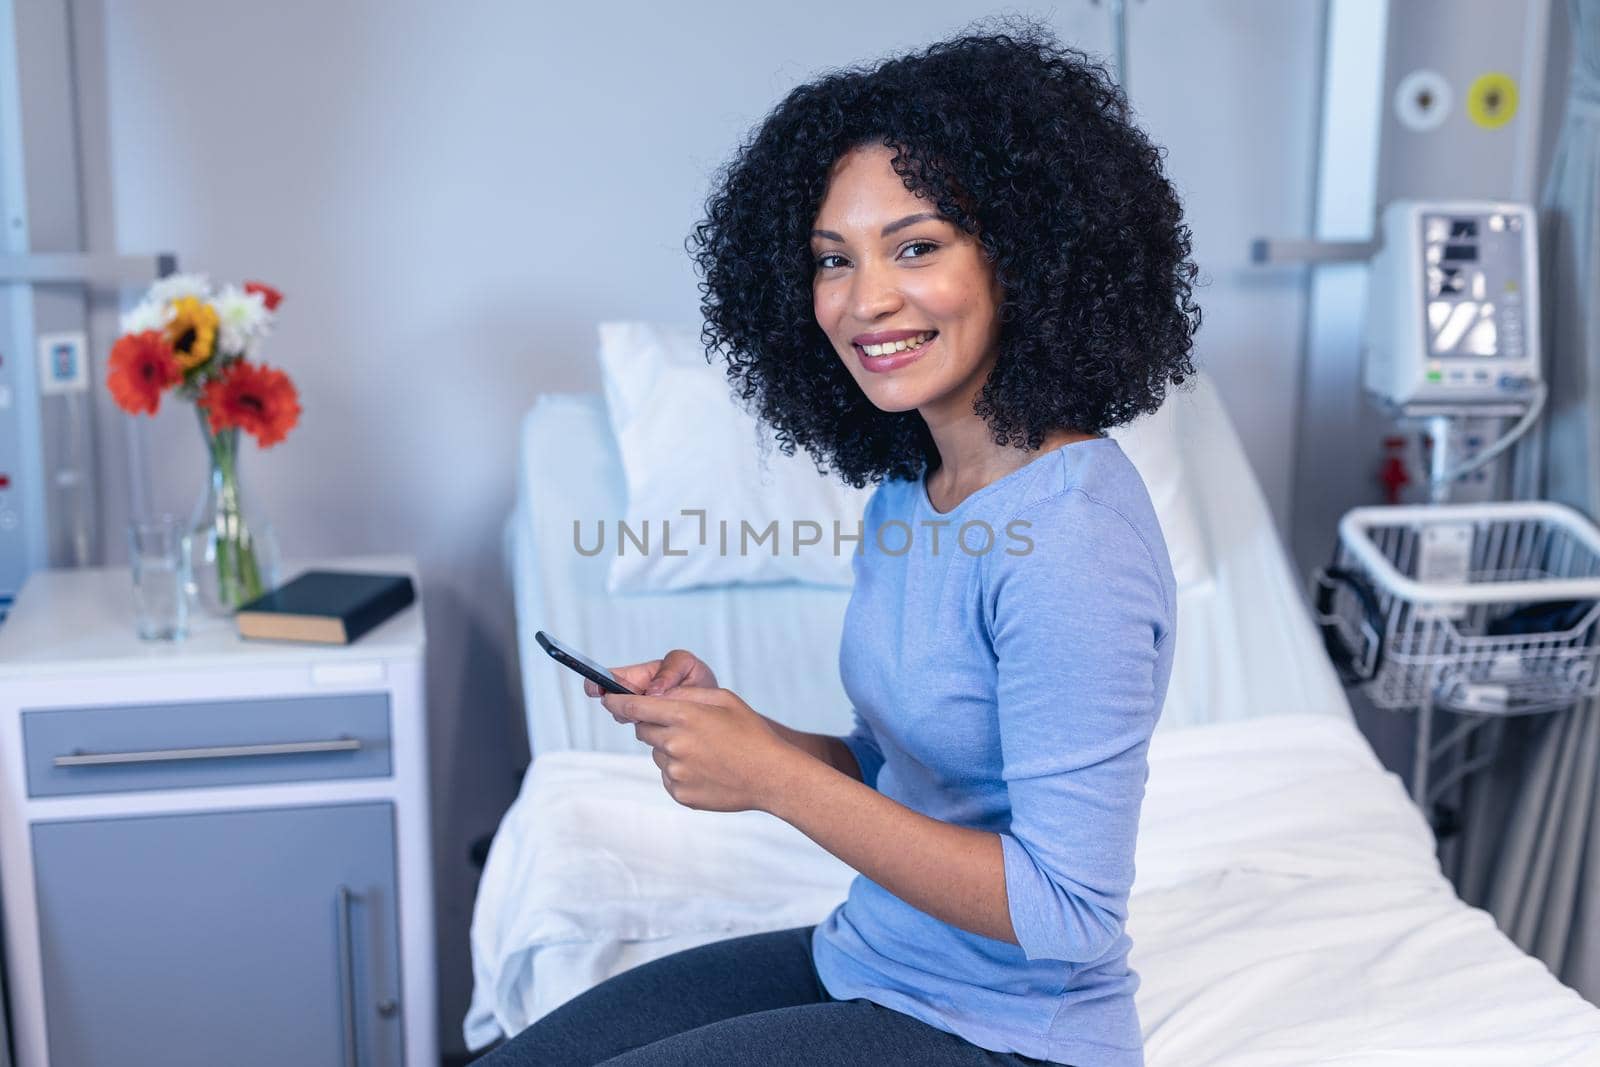 Smiling mixed race female patient sitting on hospital bed using smartphone and looking to camera. medicine, health and healthcare services.